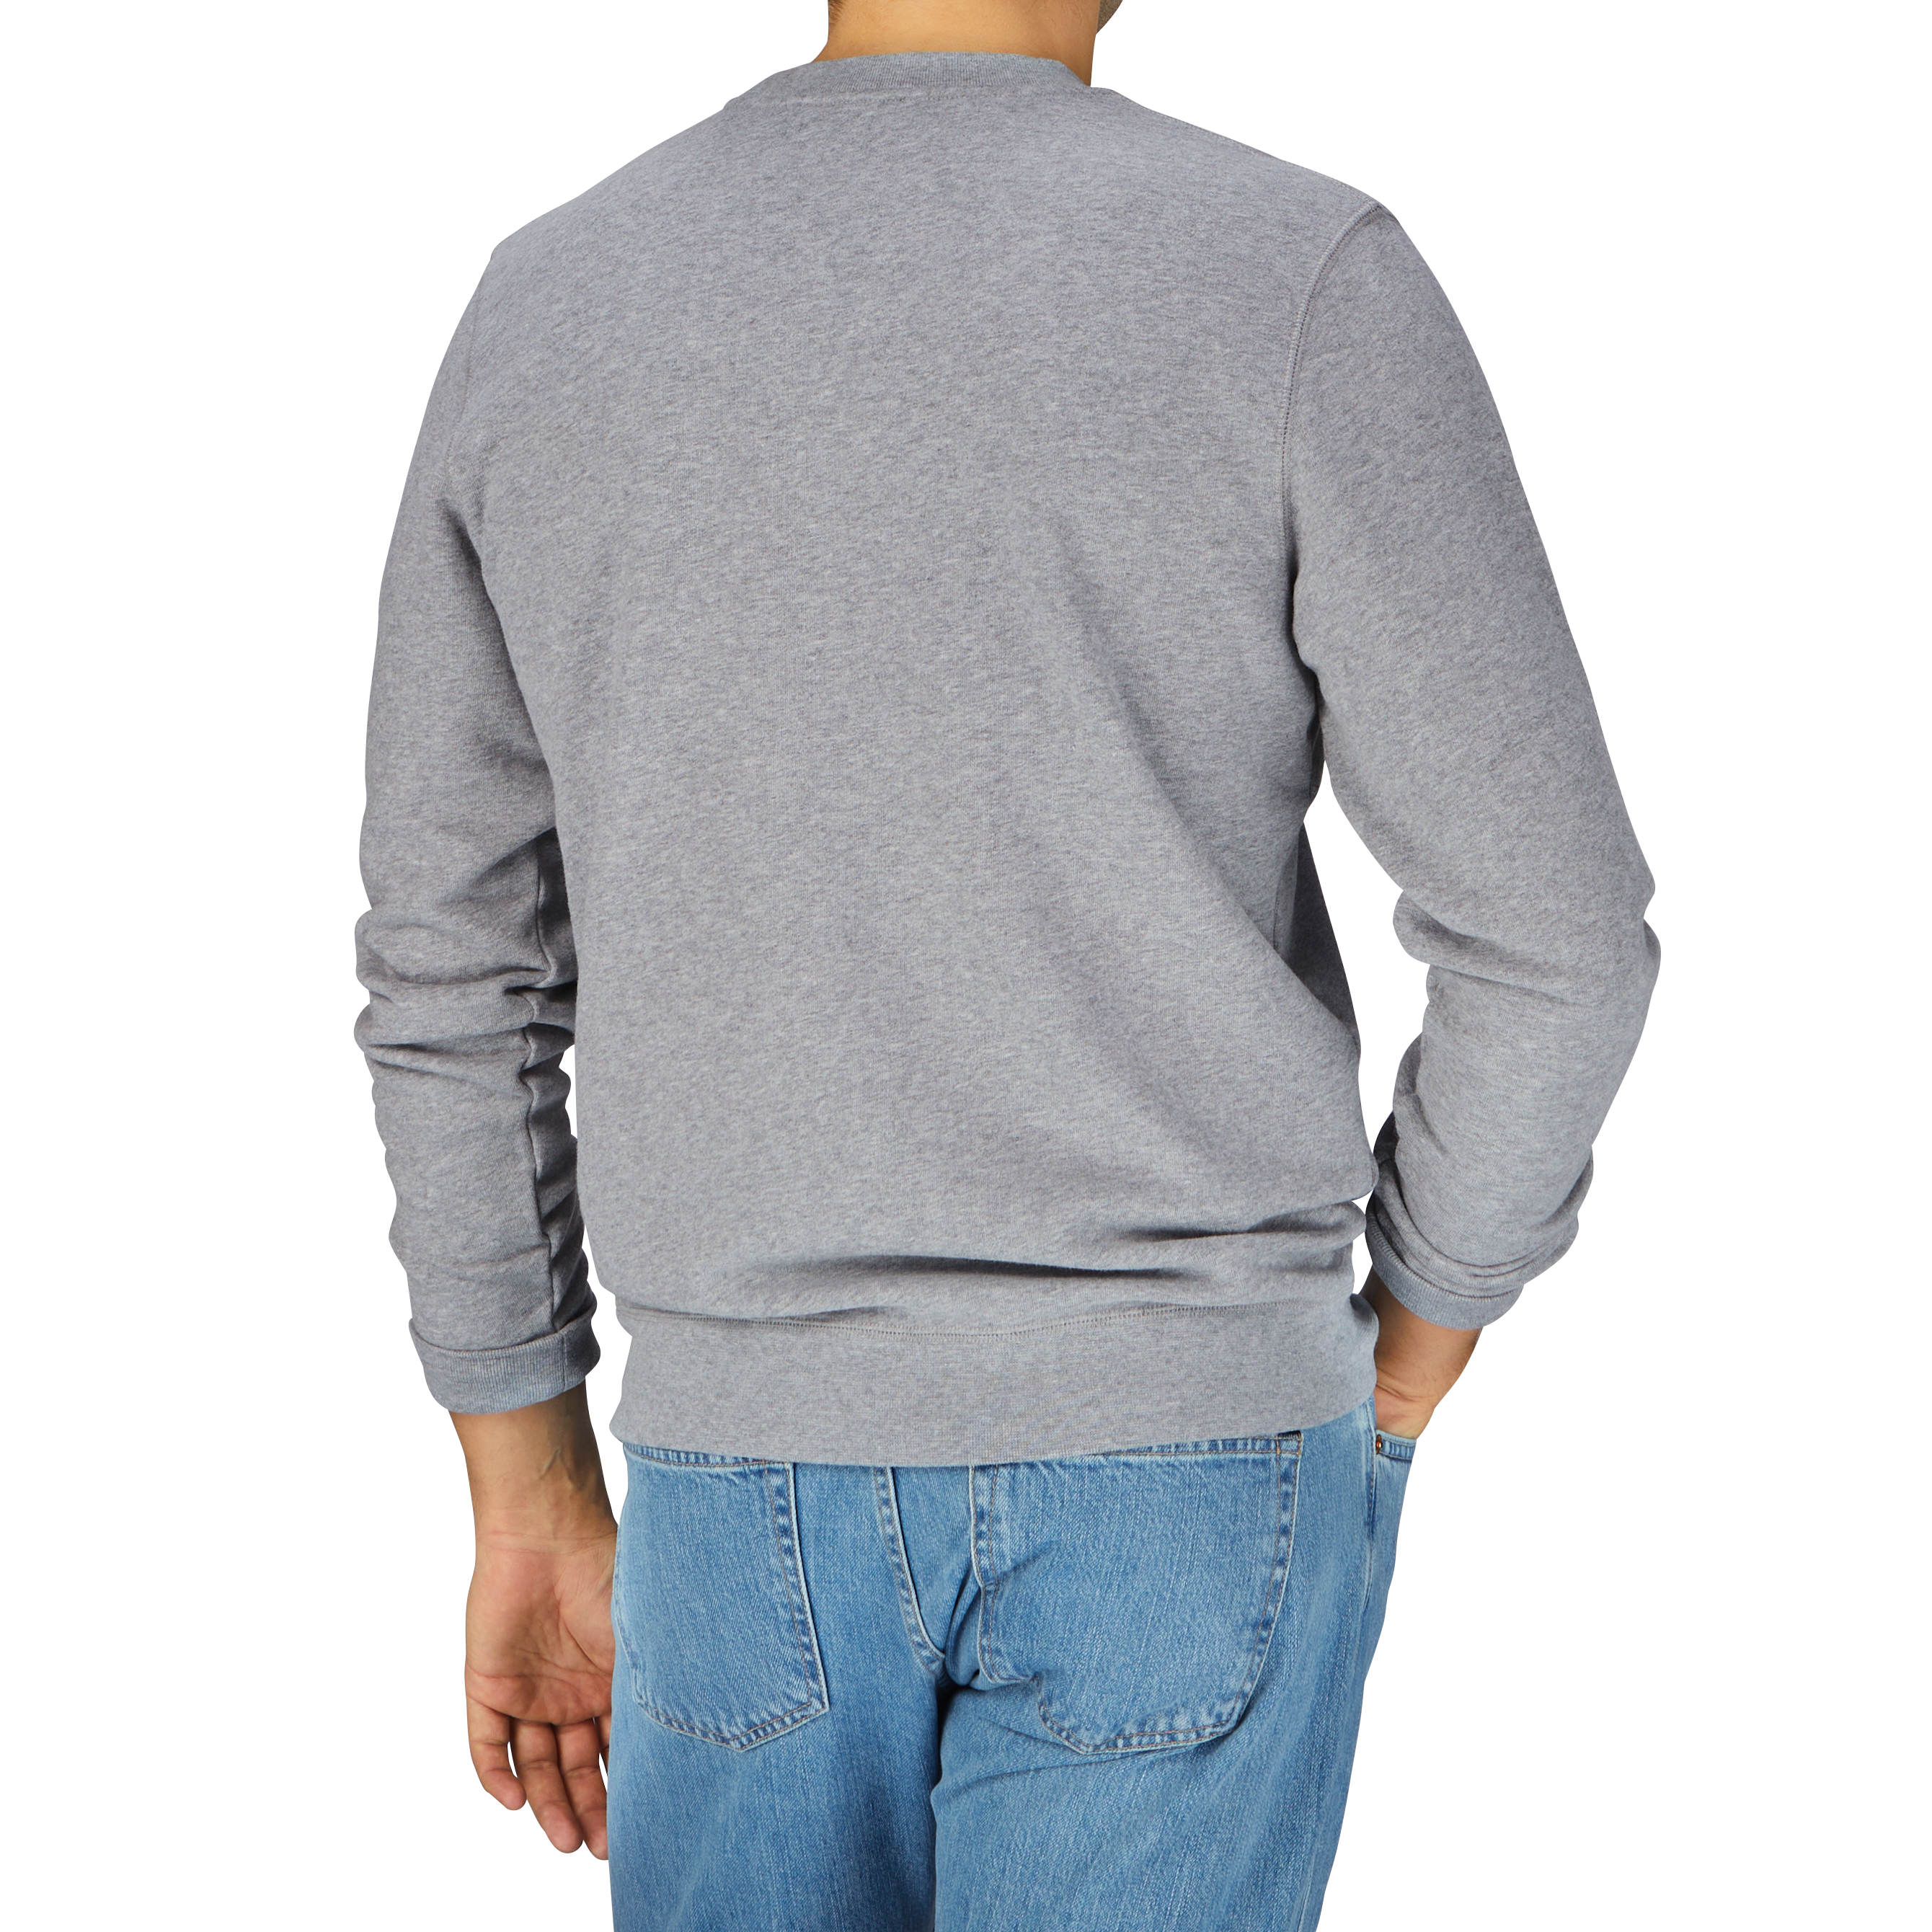 A man in a Sunspel Grey Melange Cotton Loopback Sweatshirt and jeans is seen from behind.